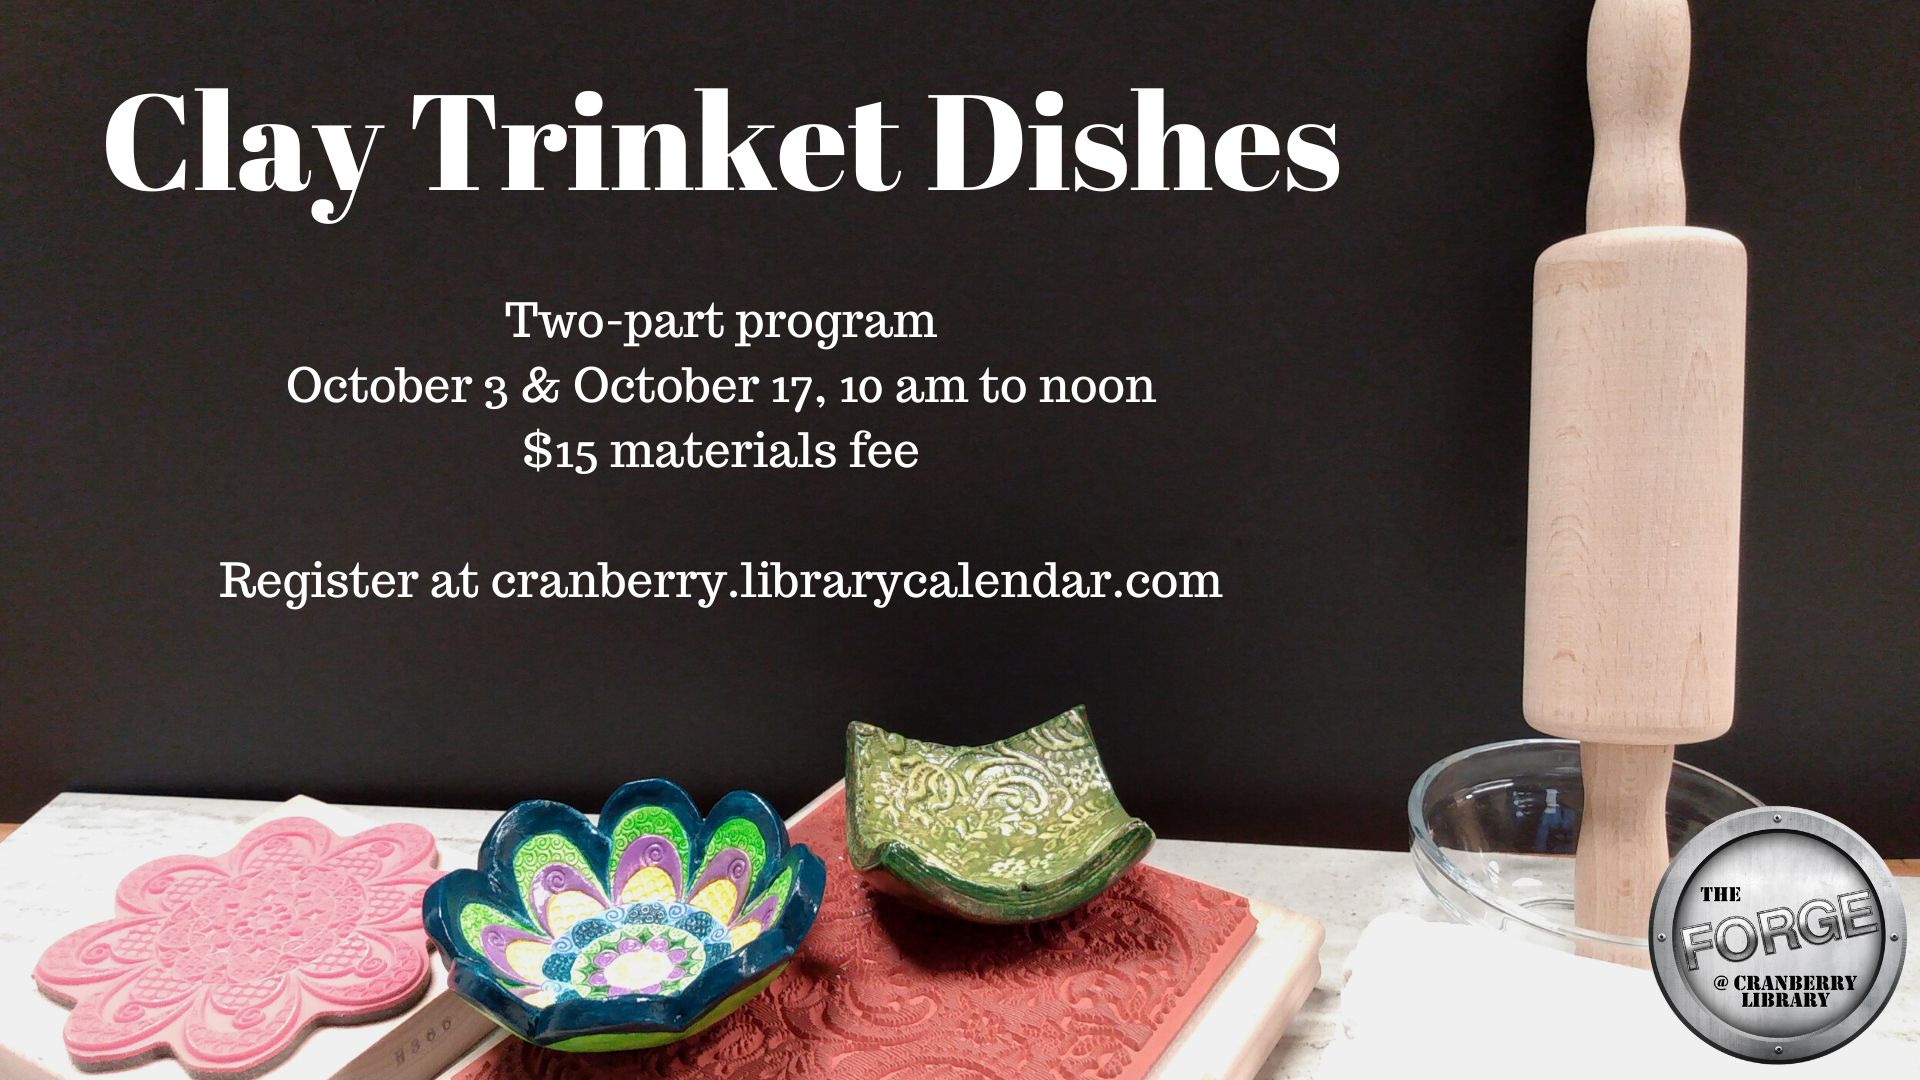 Flyer for Clay Trinket Dishes program